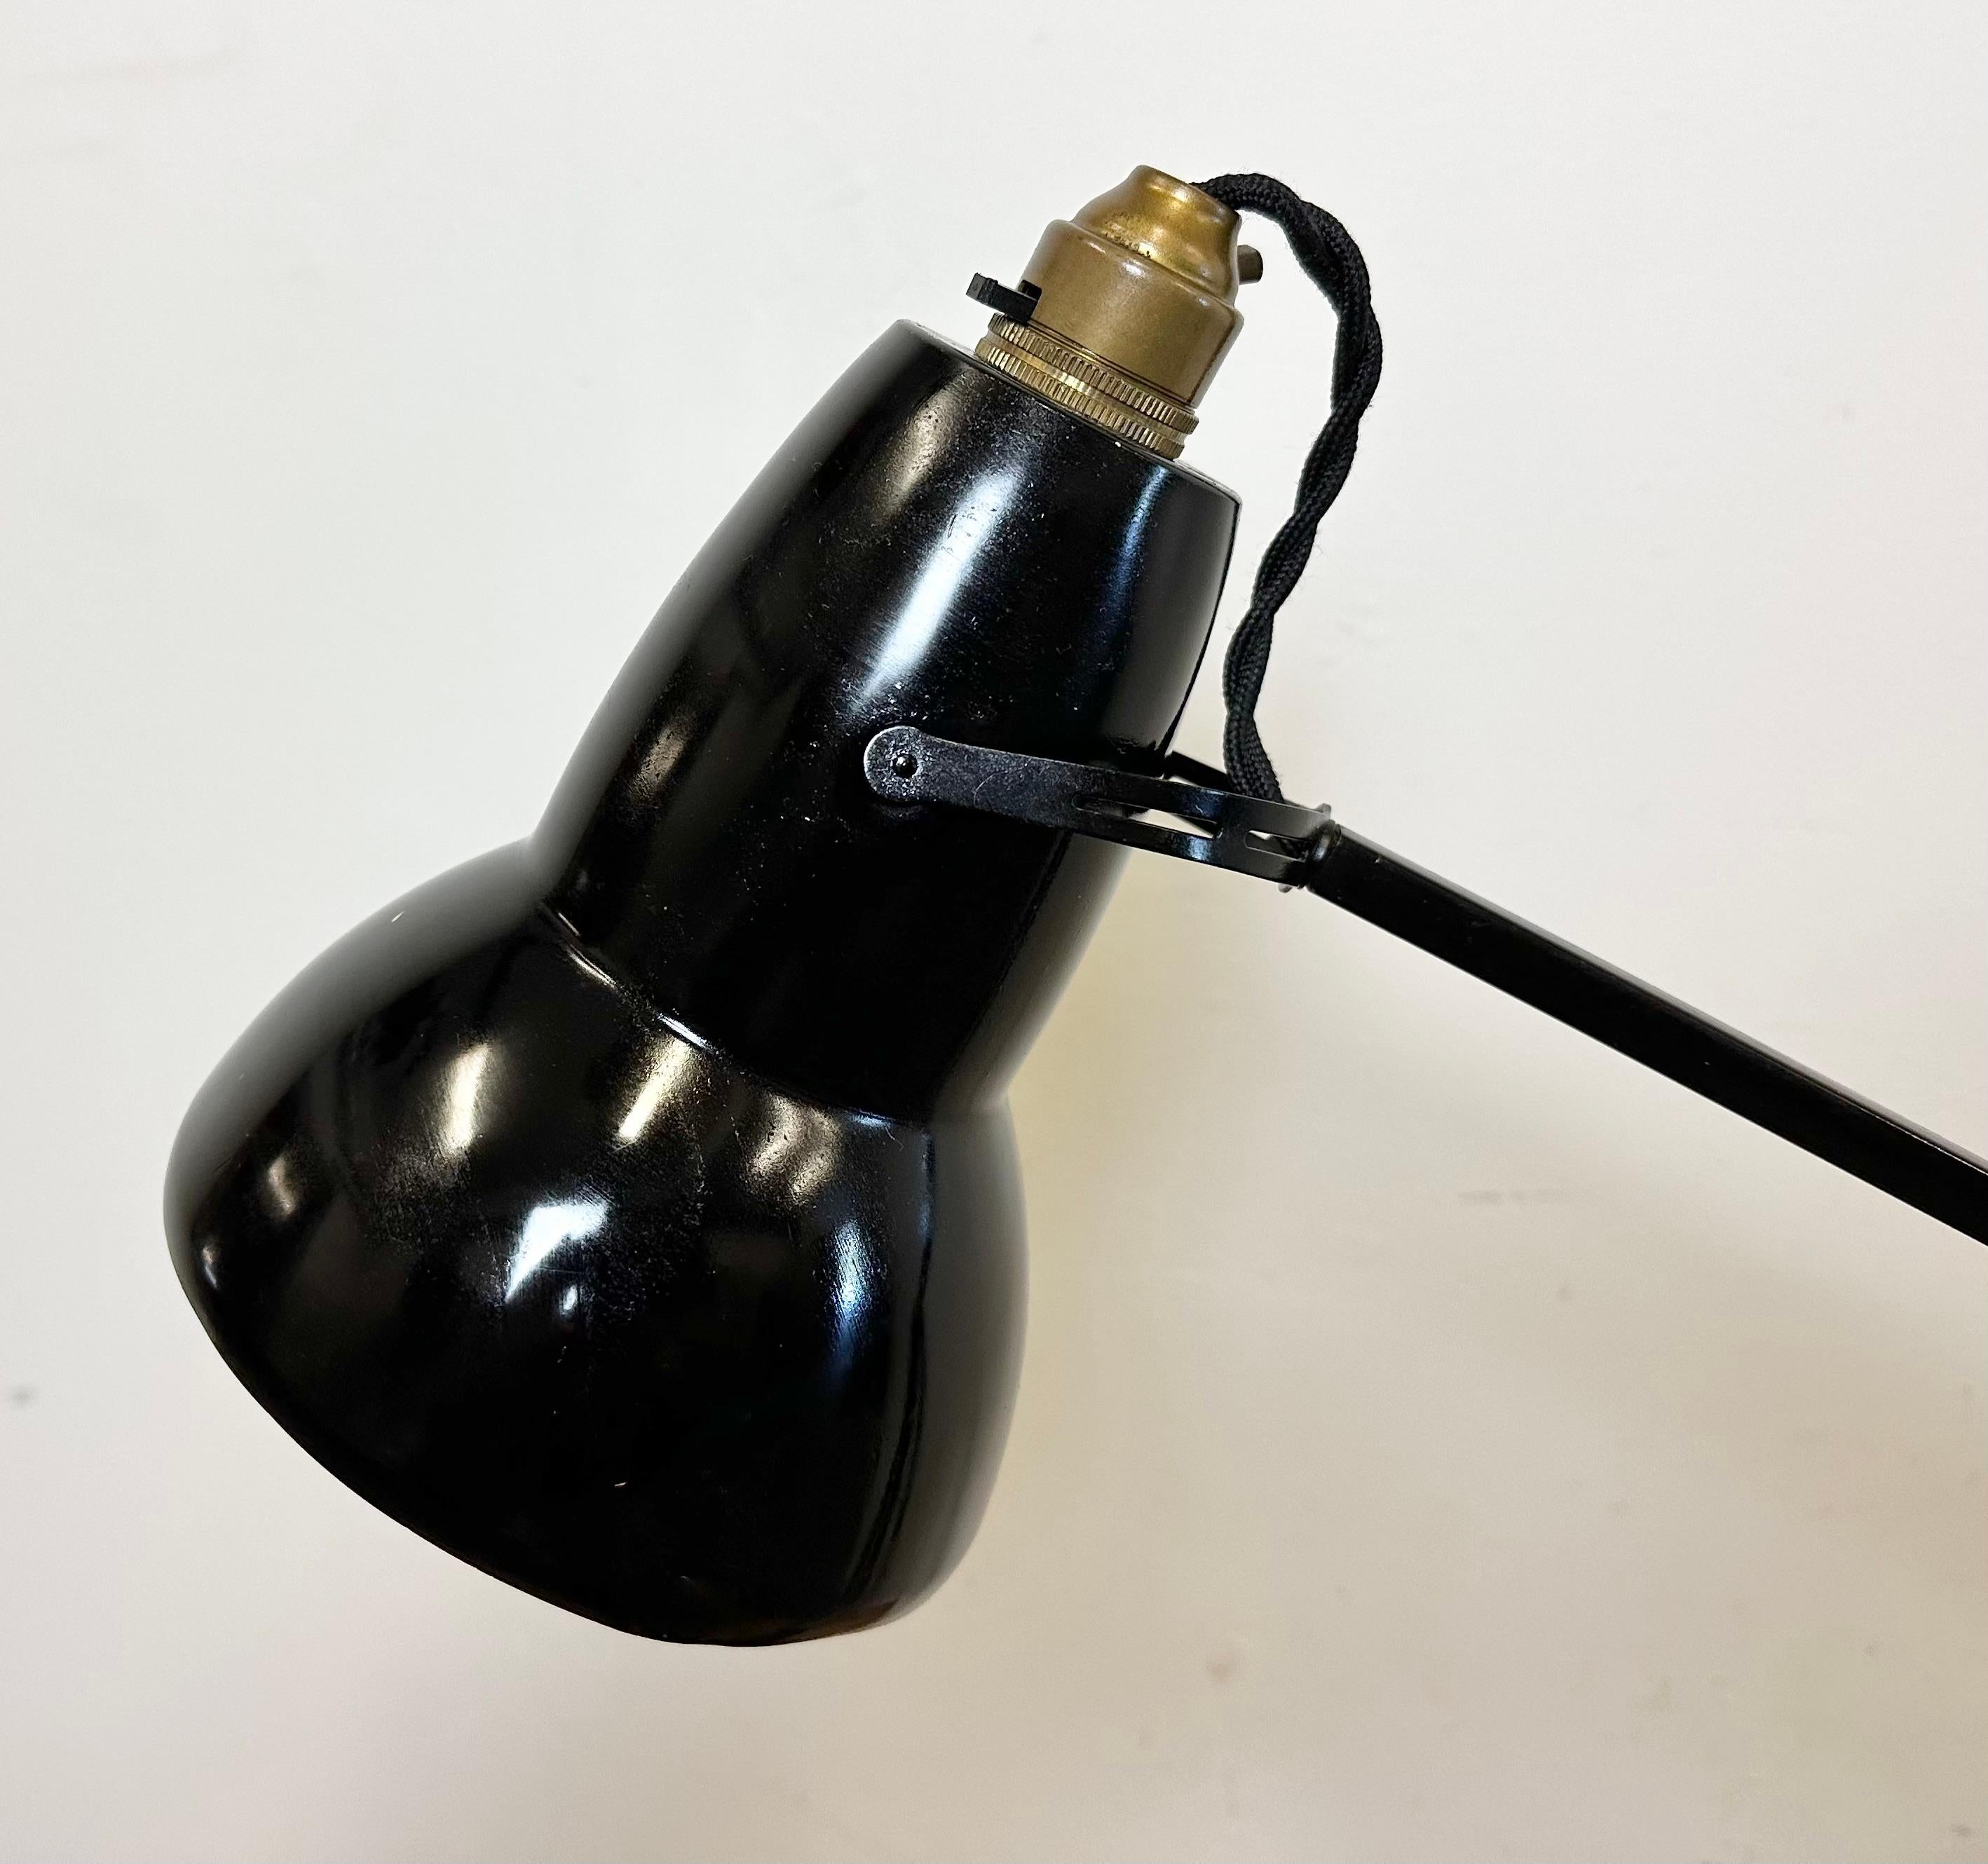 British Vintage Black Anglepoise Table Lamp from Herbert Terry & Sons, 1950s